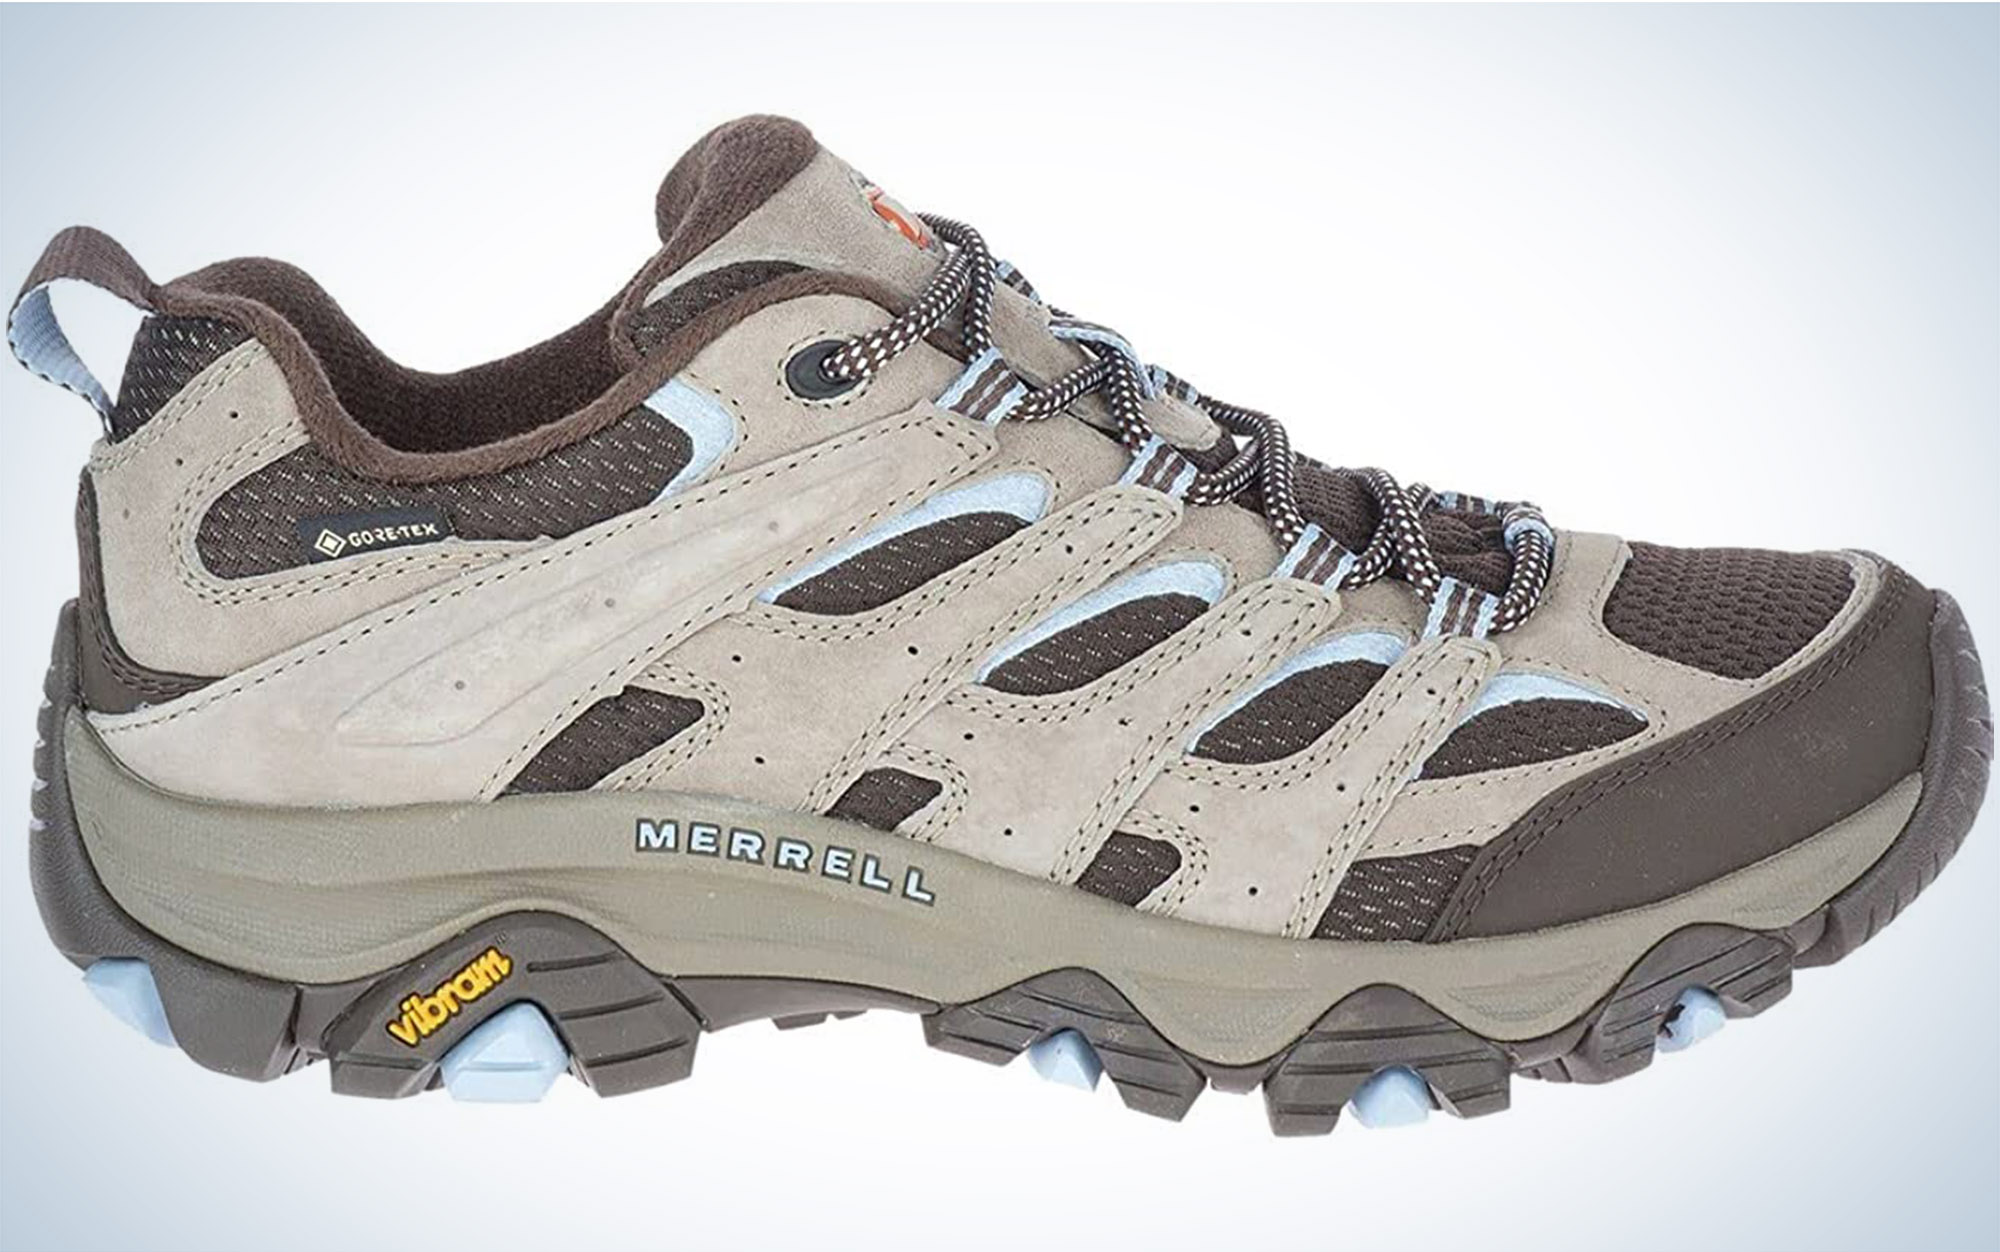 We tested the Merrell Moab 3 GTX.